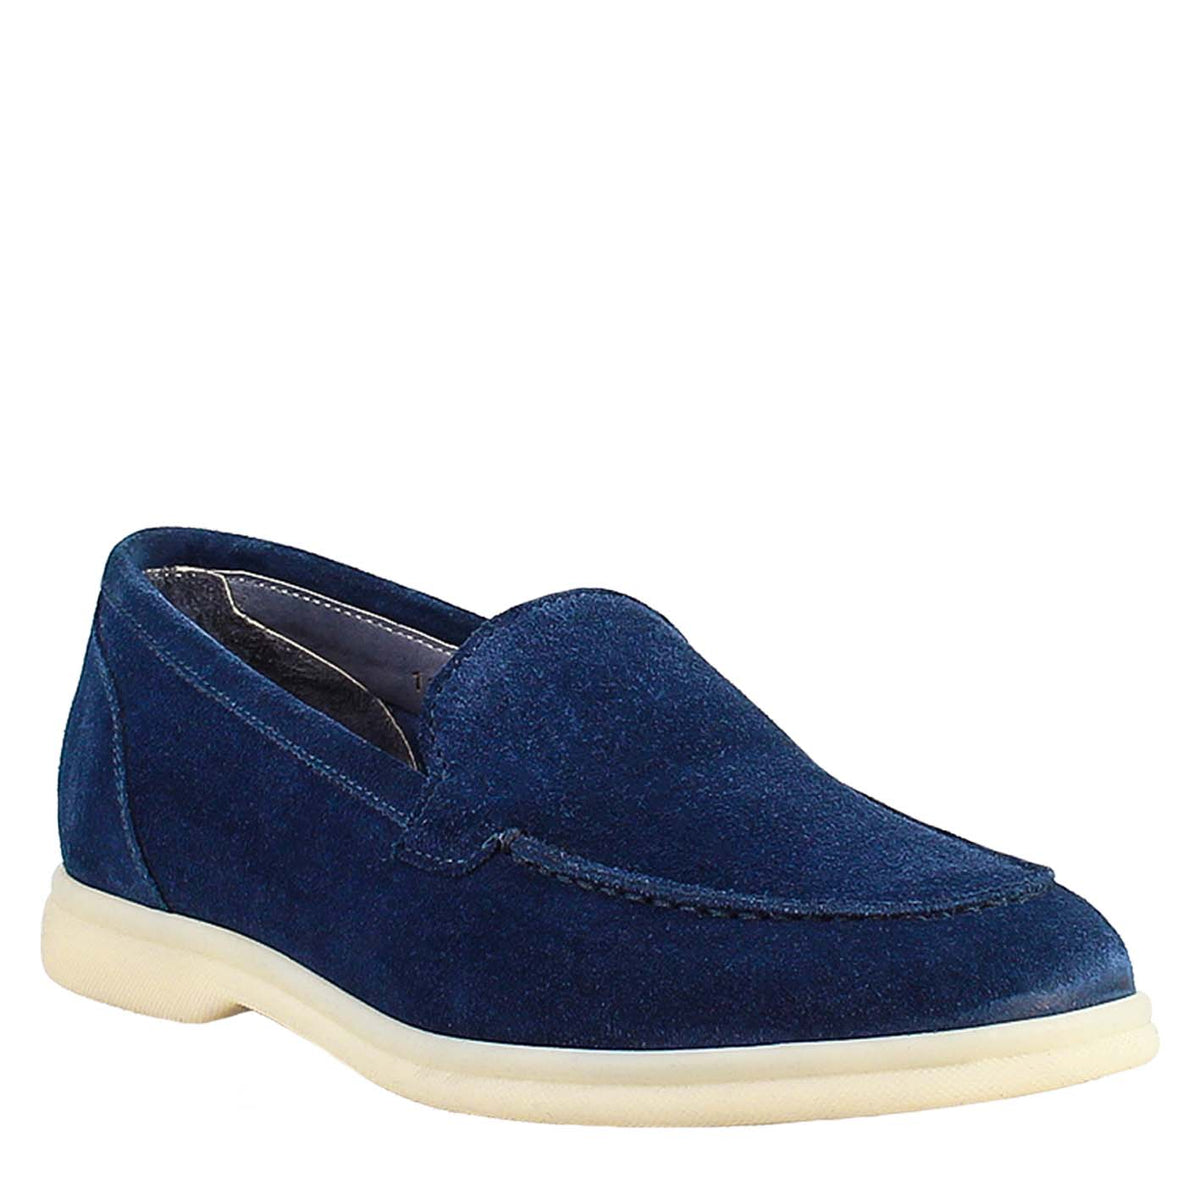 Women's flexible moccasin in blue suede leather